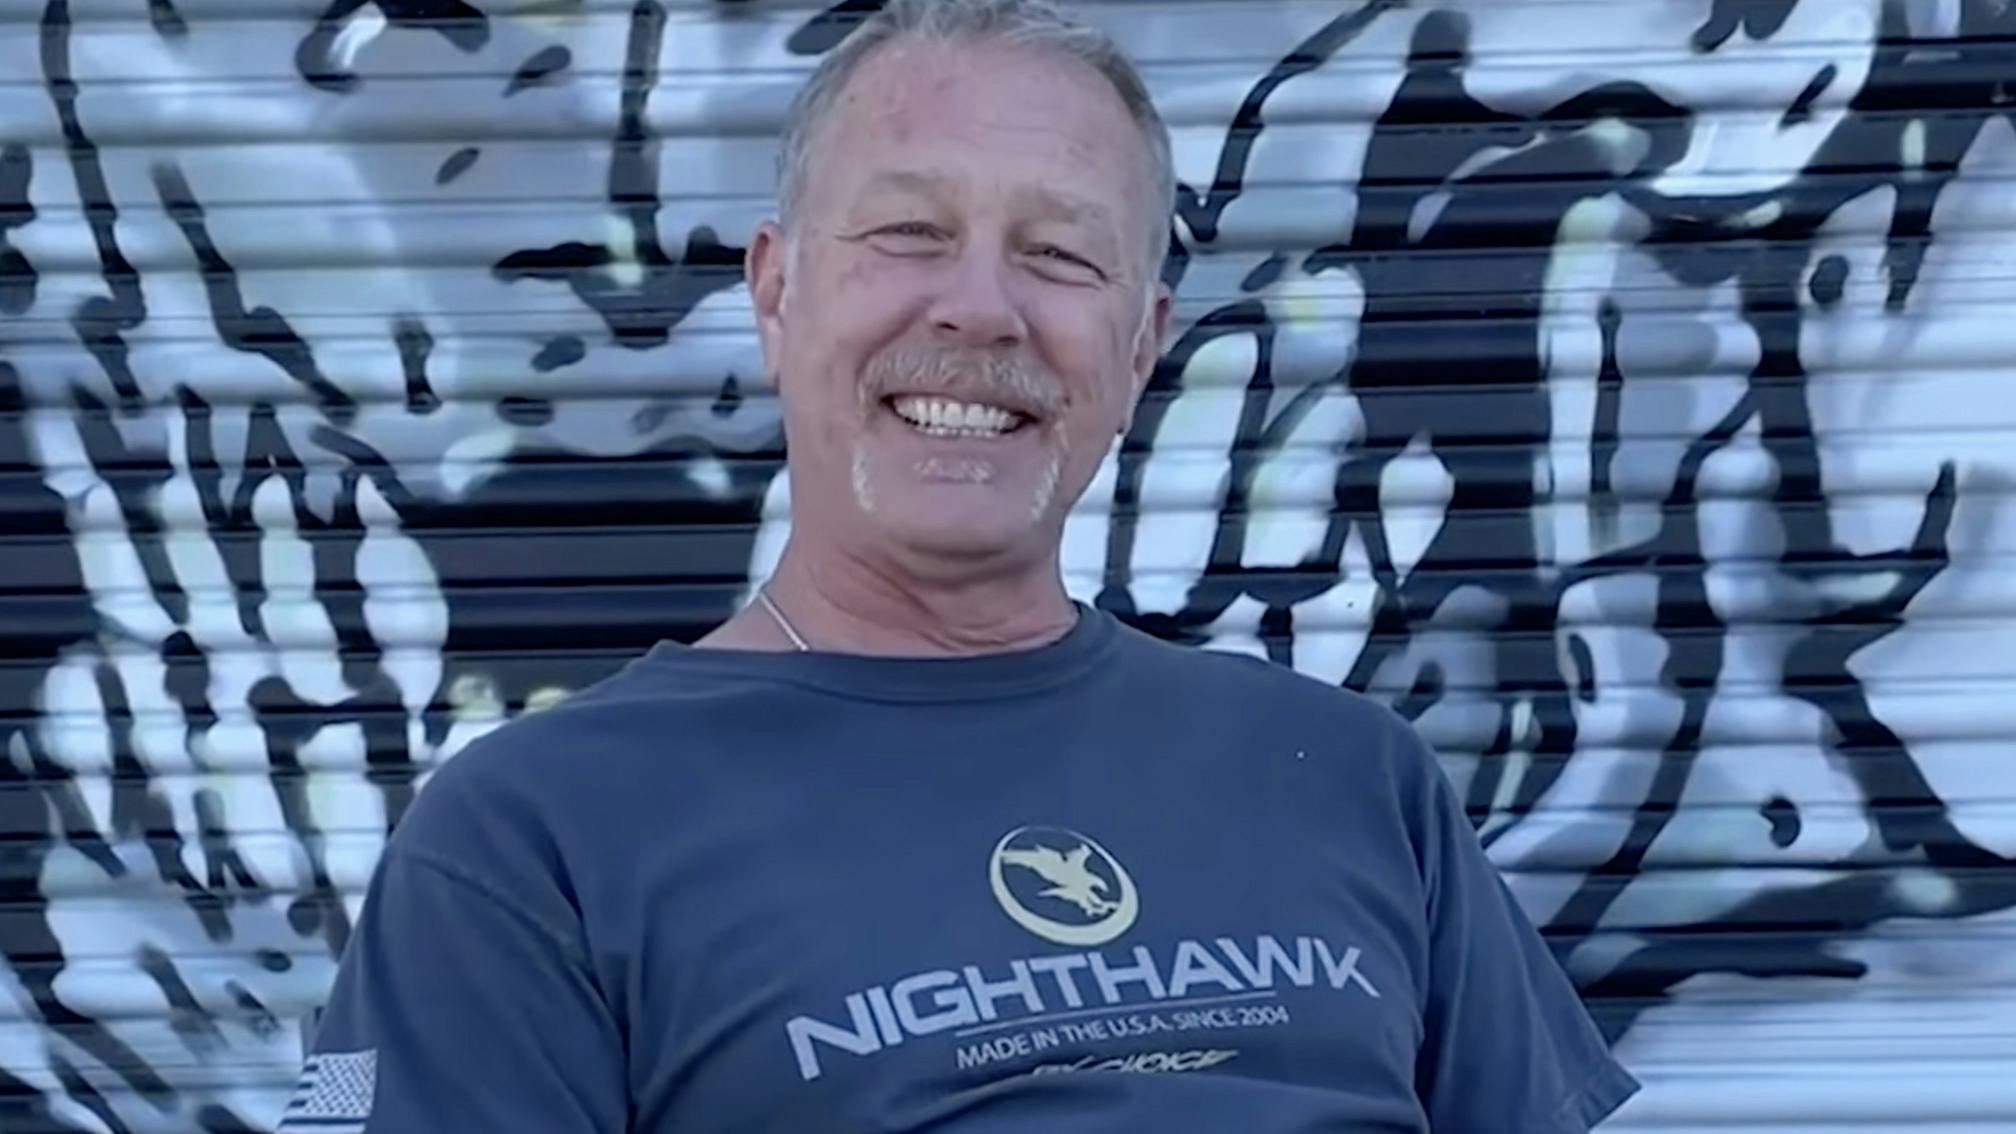 "Music has saved my life daily…" Watch James Hetfield's wholesome appearance at the 2021 Little Kids Rock Virtual Benefit